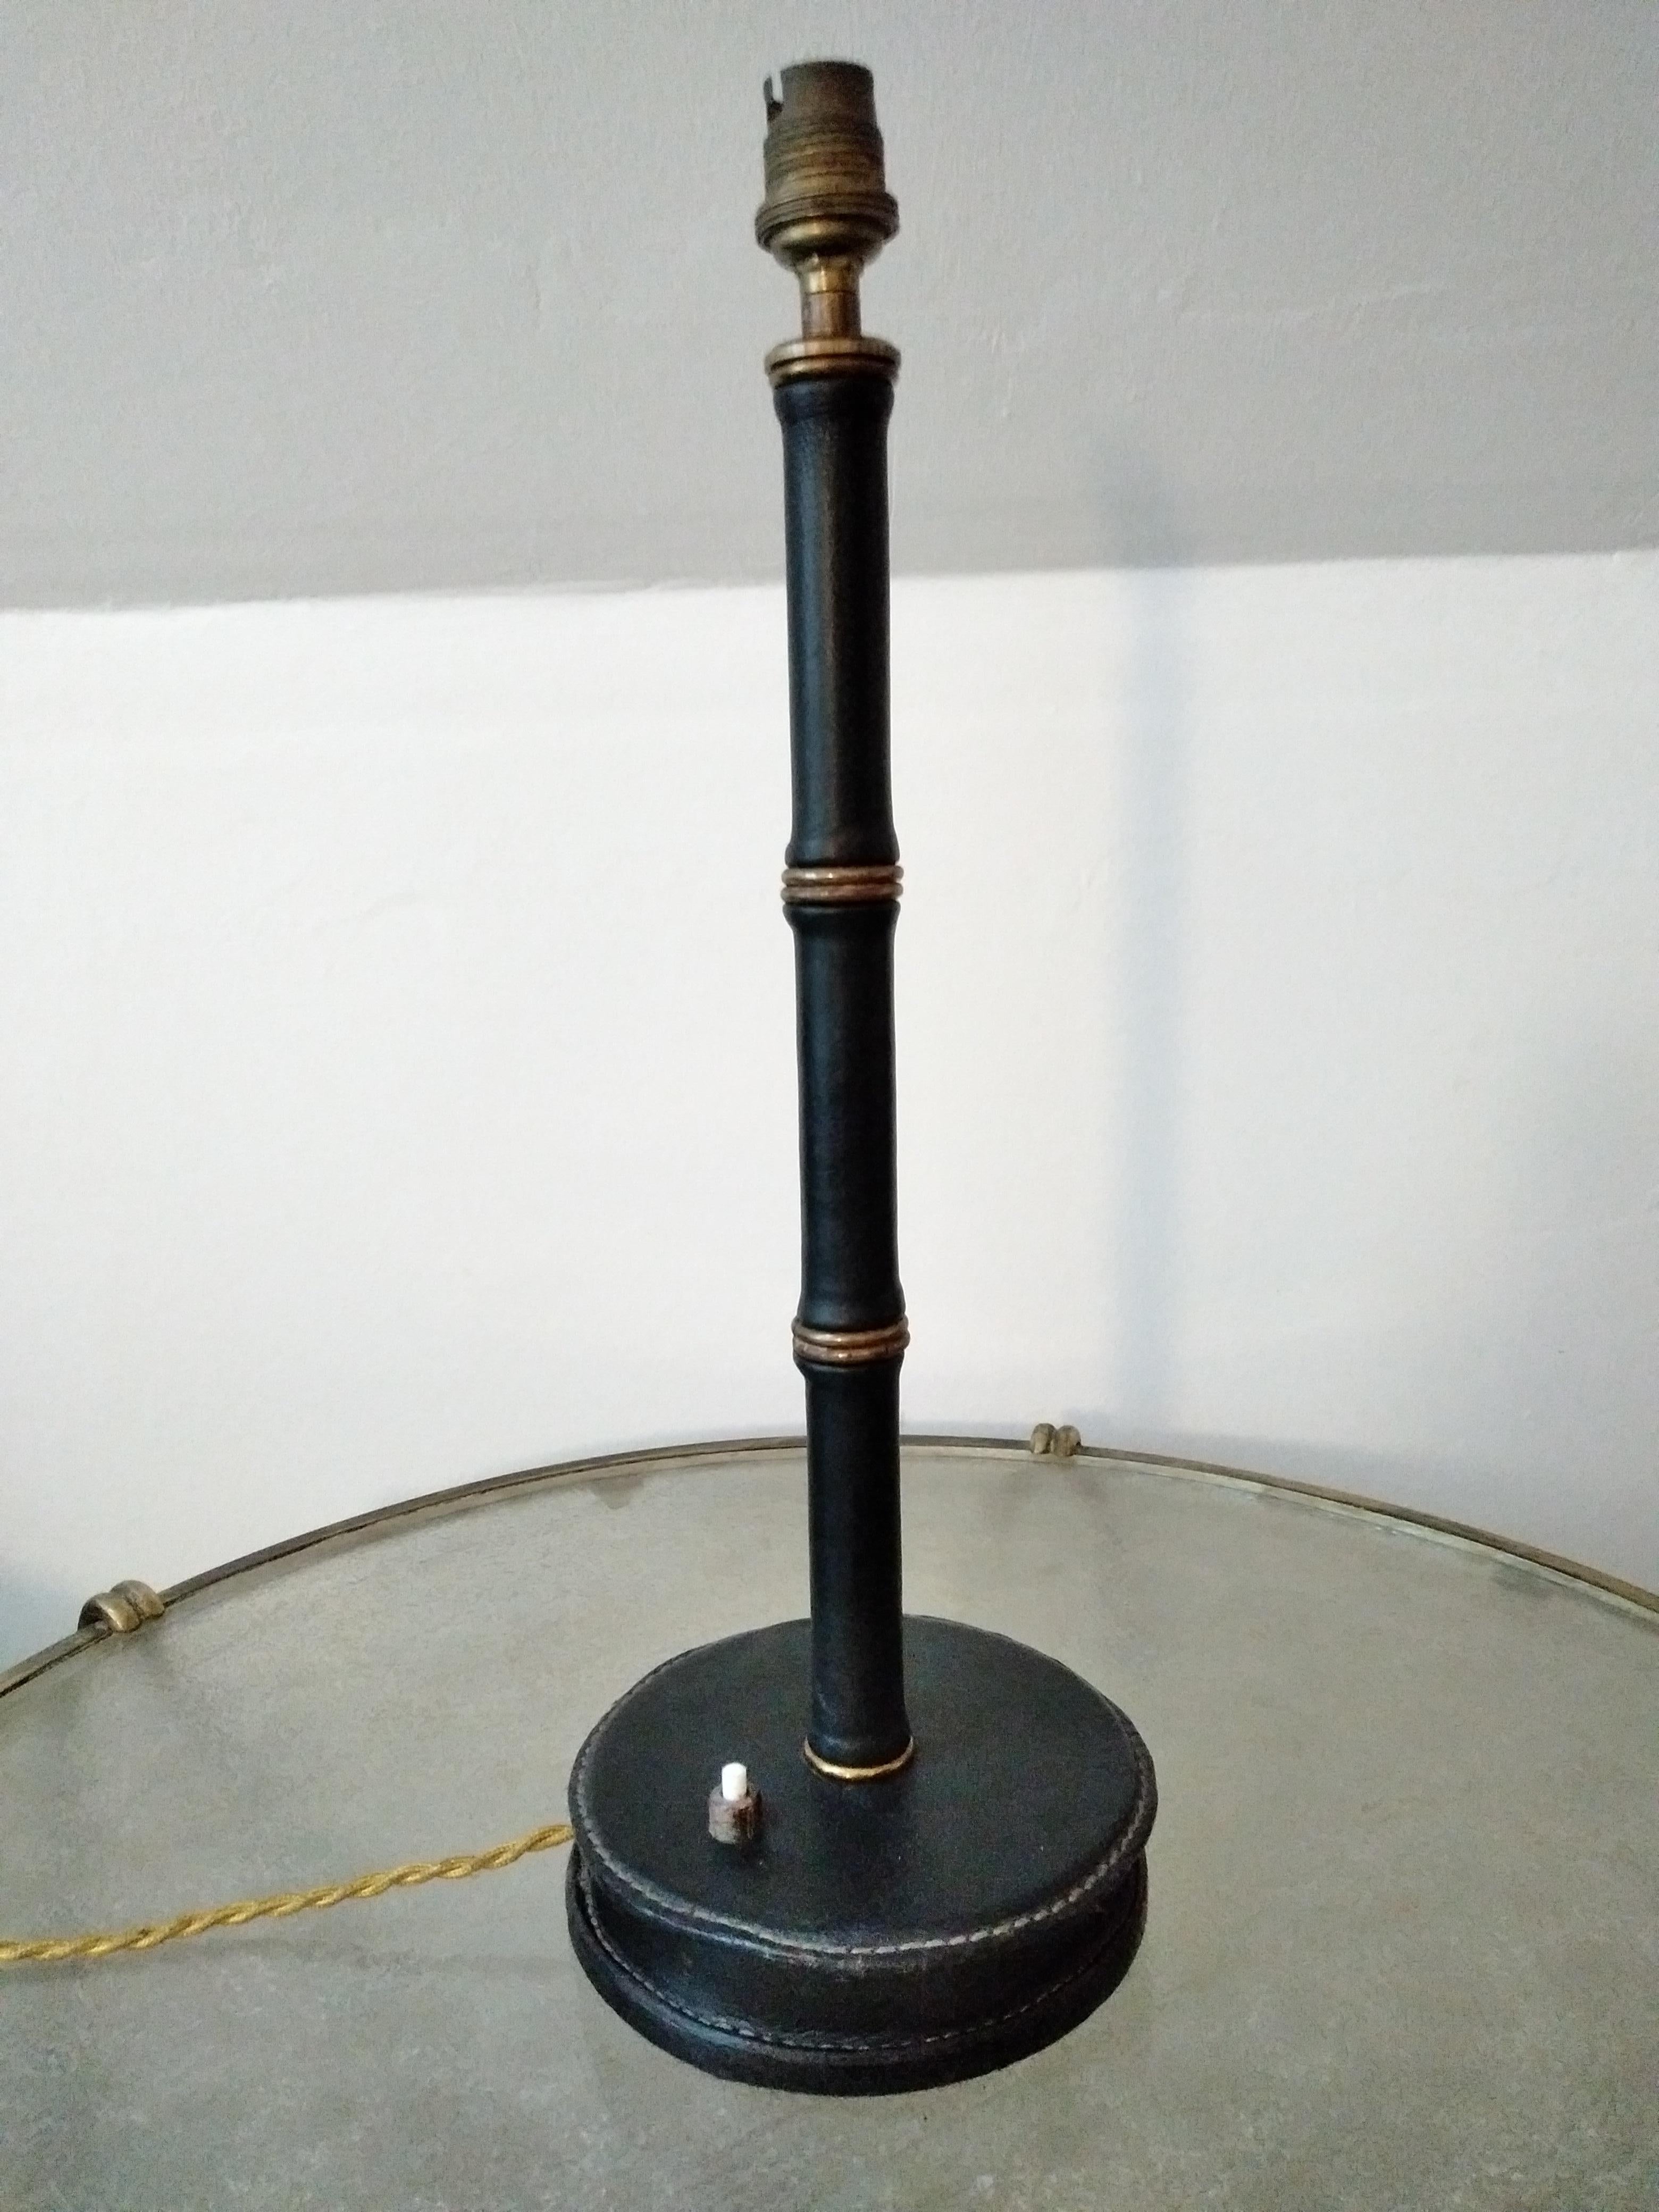 Mid-Century Modern Jacques Adnet Black Stitched Leather Table Lamp, Bamboo Form, French, 1950s For Sale